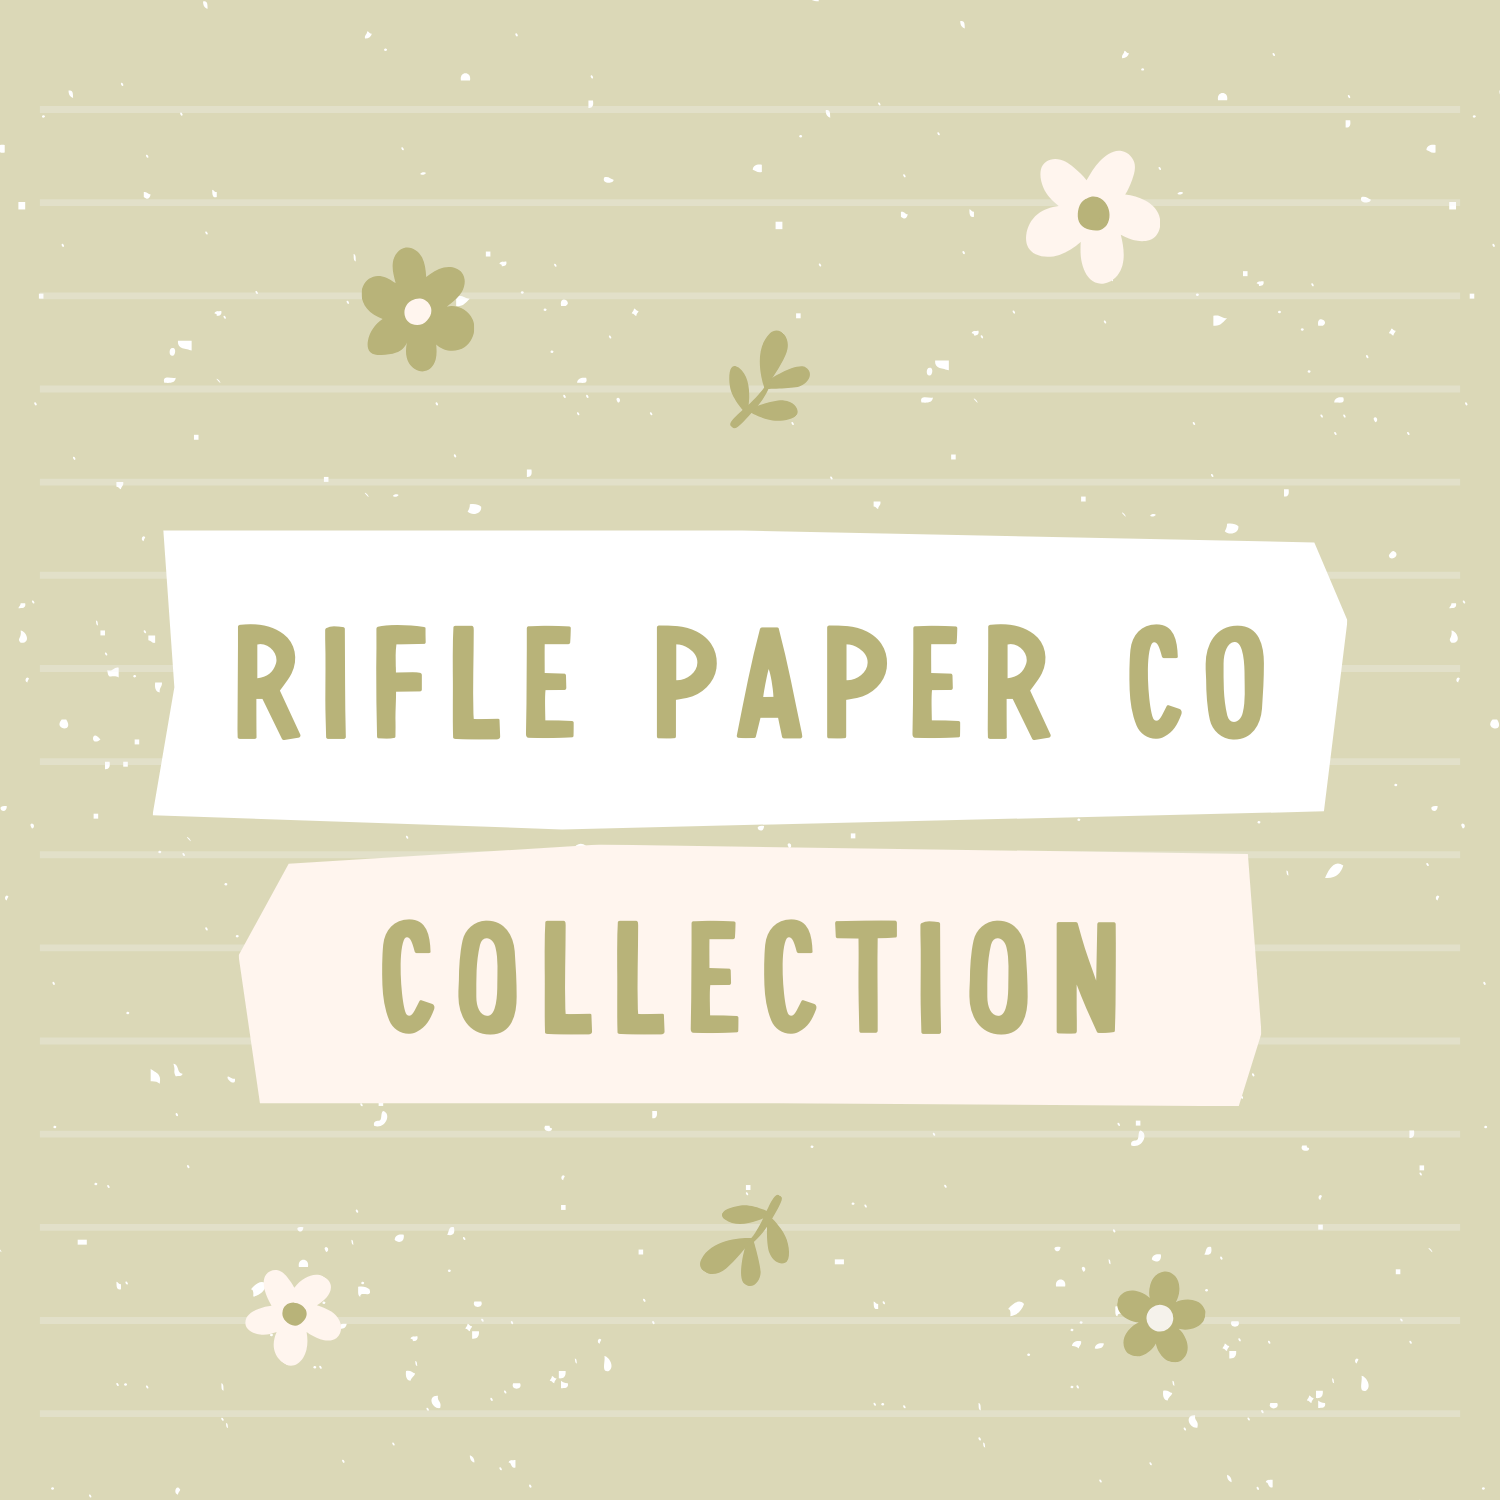 Rifle Paper Co.